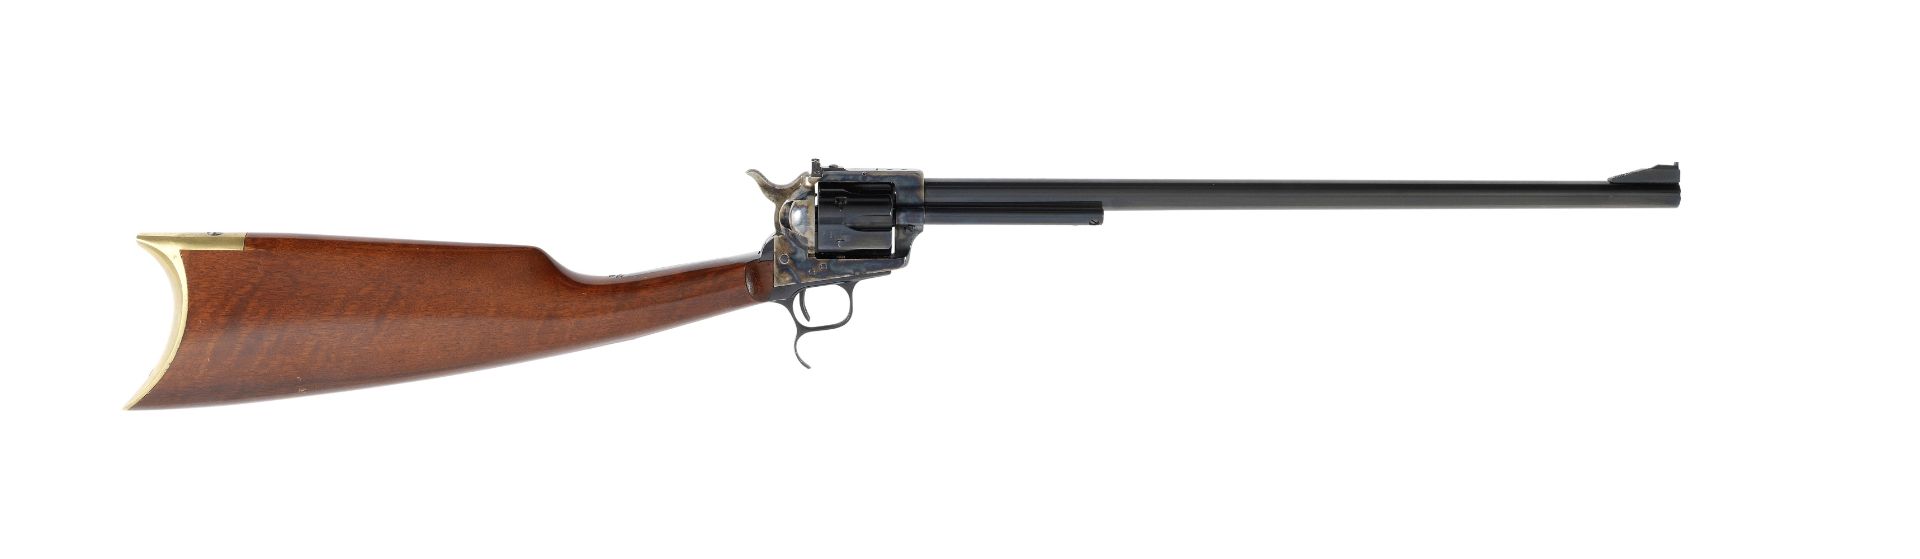 A .44-40 revolving carbine by Uberti, no. UA1782 With an additional stock of 17in. length